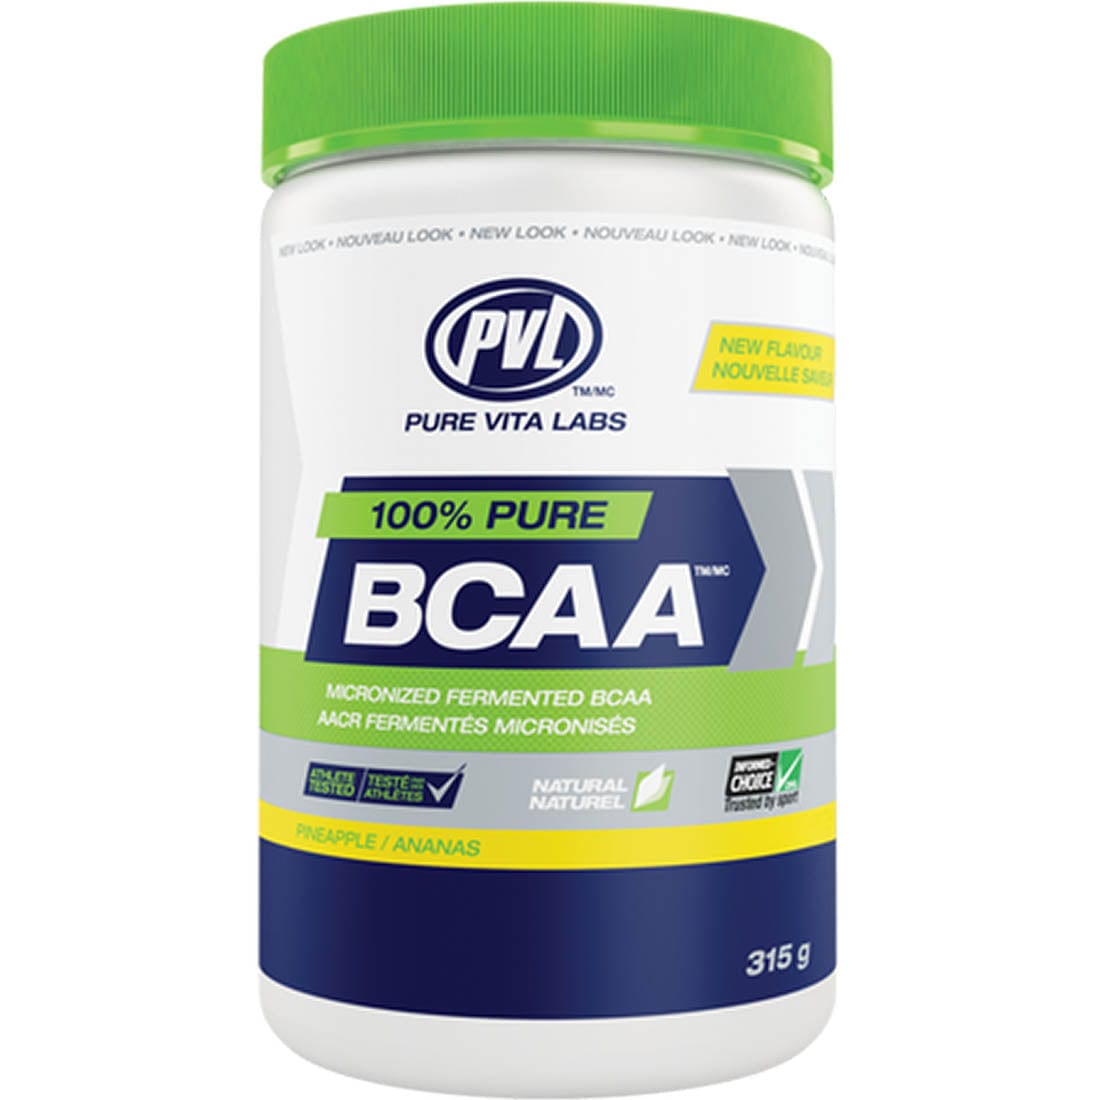 PVL 100% Natural BCAA Powder (Micronized and Fermented)